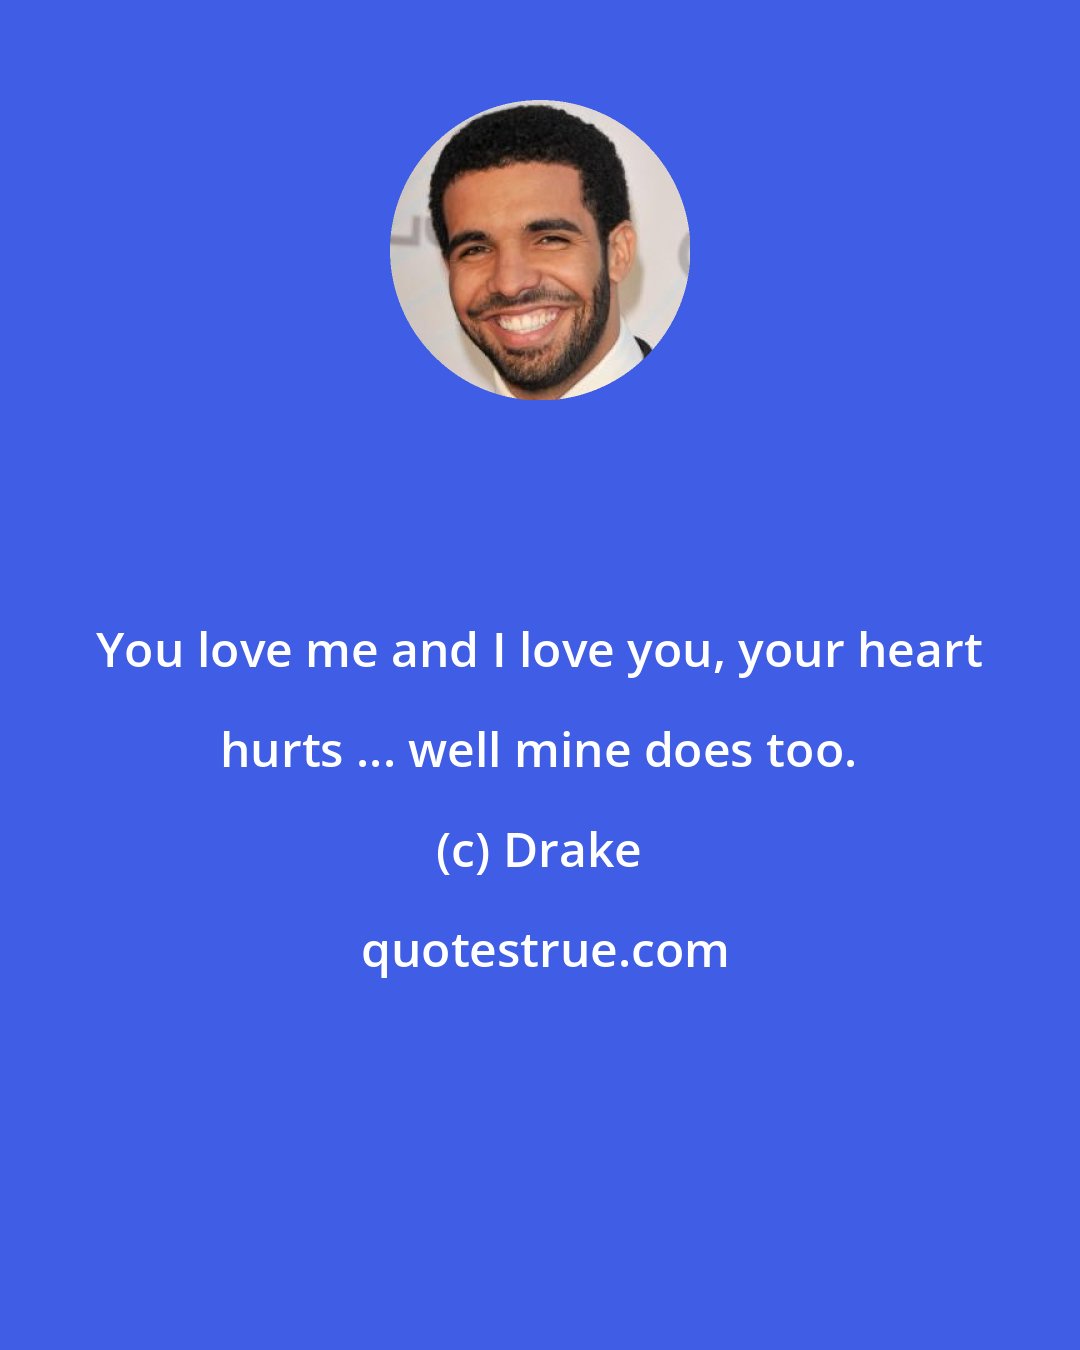 Drake: You love me and I love you, your heart hurts ... well mine does too.